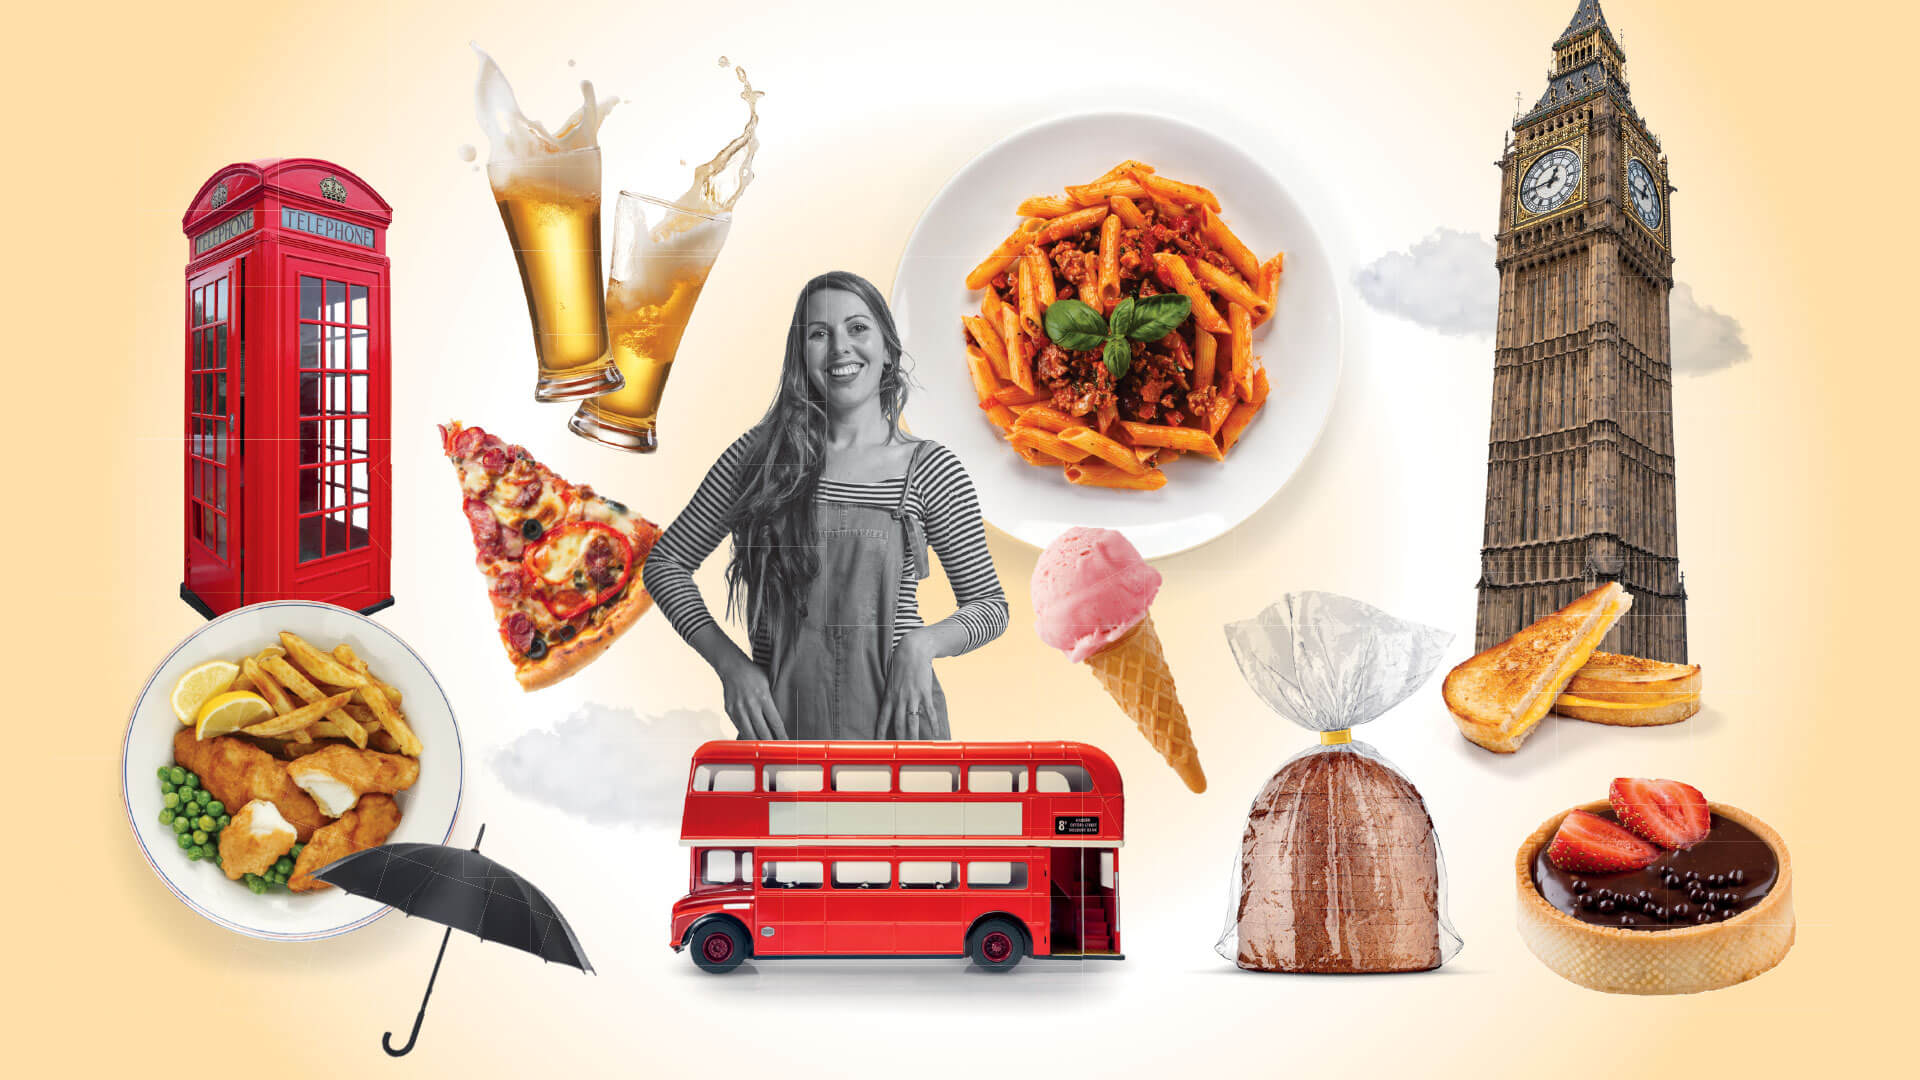 Blogger Laura Strange shares a local's guide to dining gluten free in London